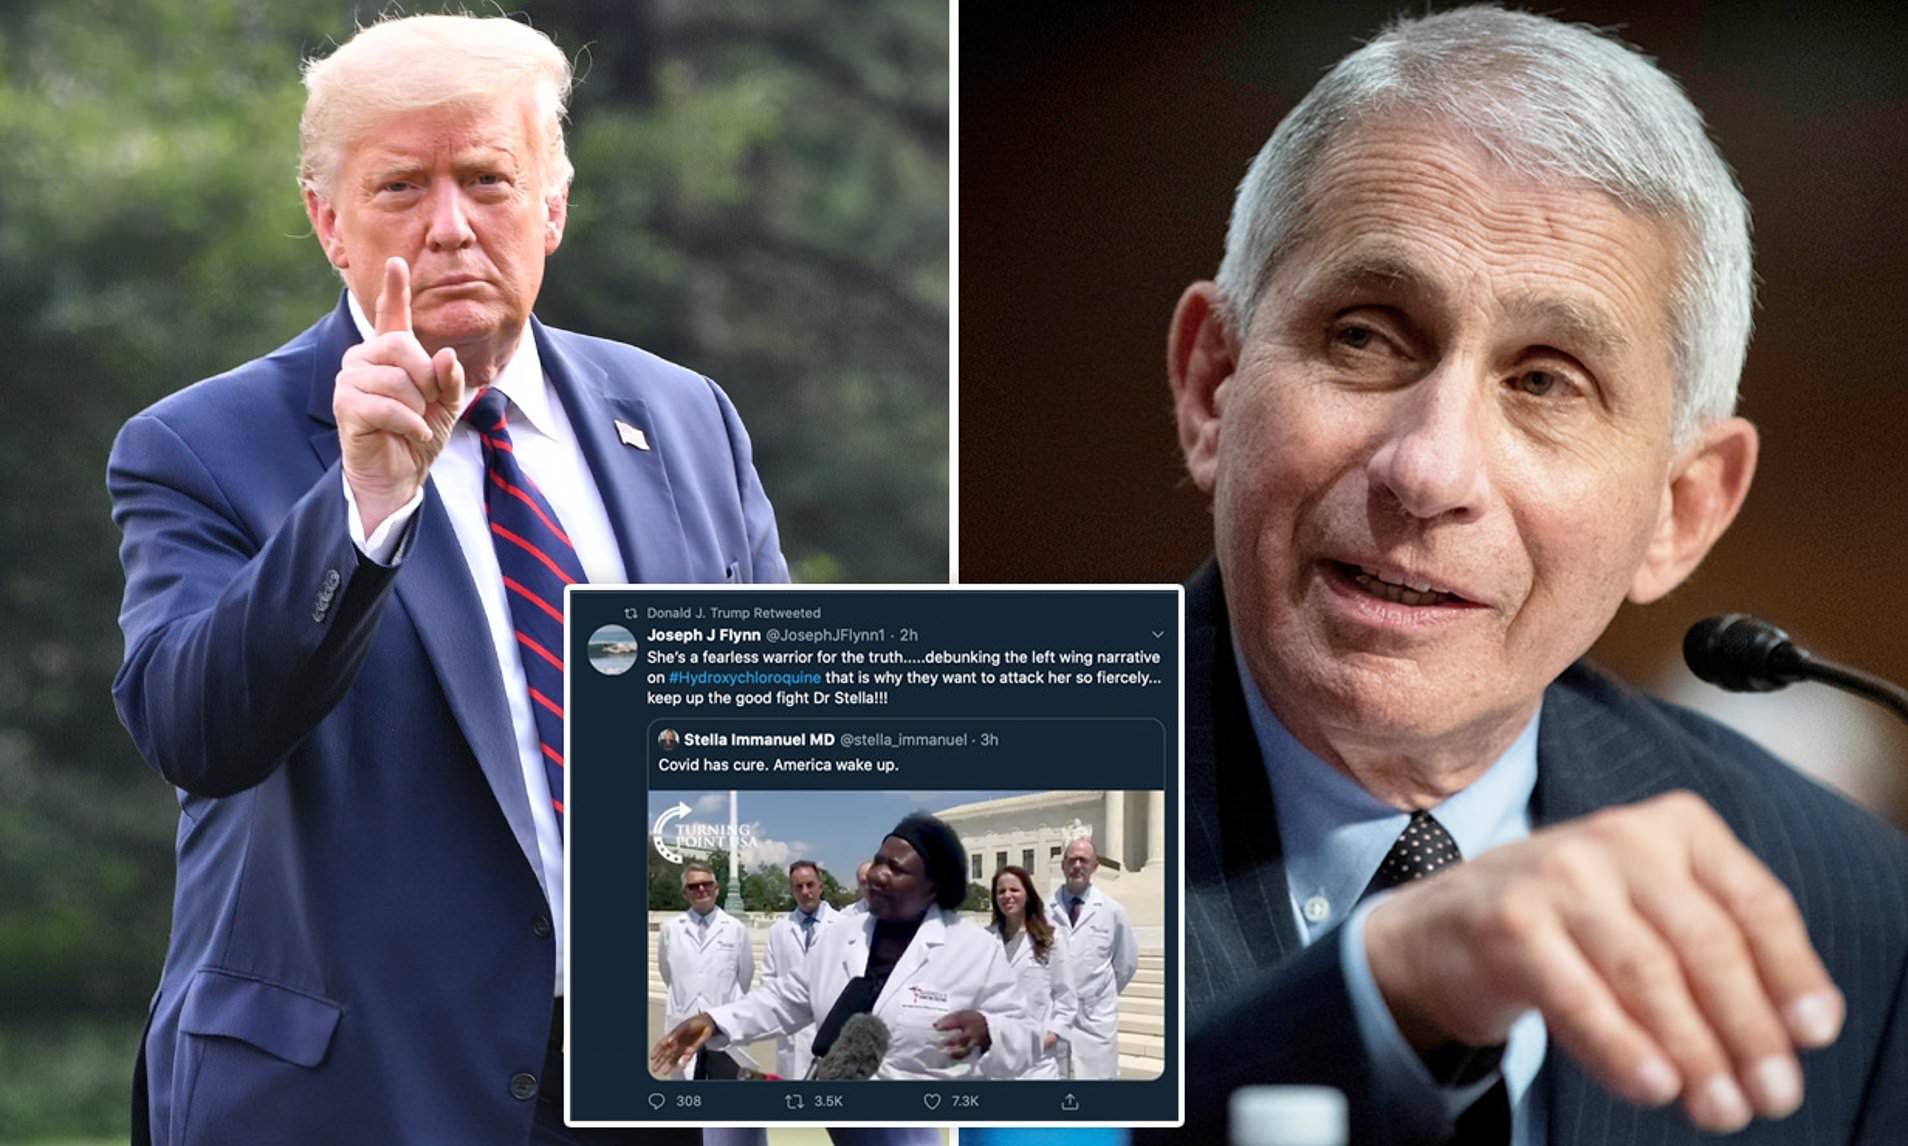 Dr Stella Immanuel - Trump Goes On Rampage Over COVID Claims